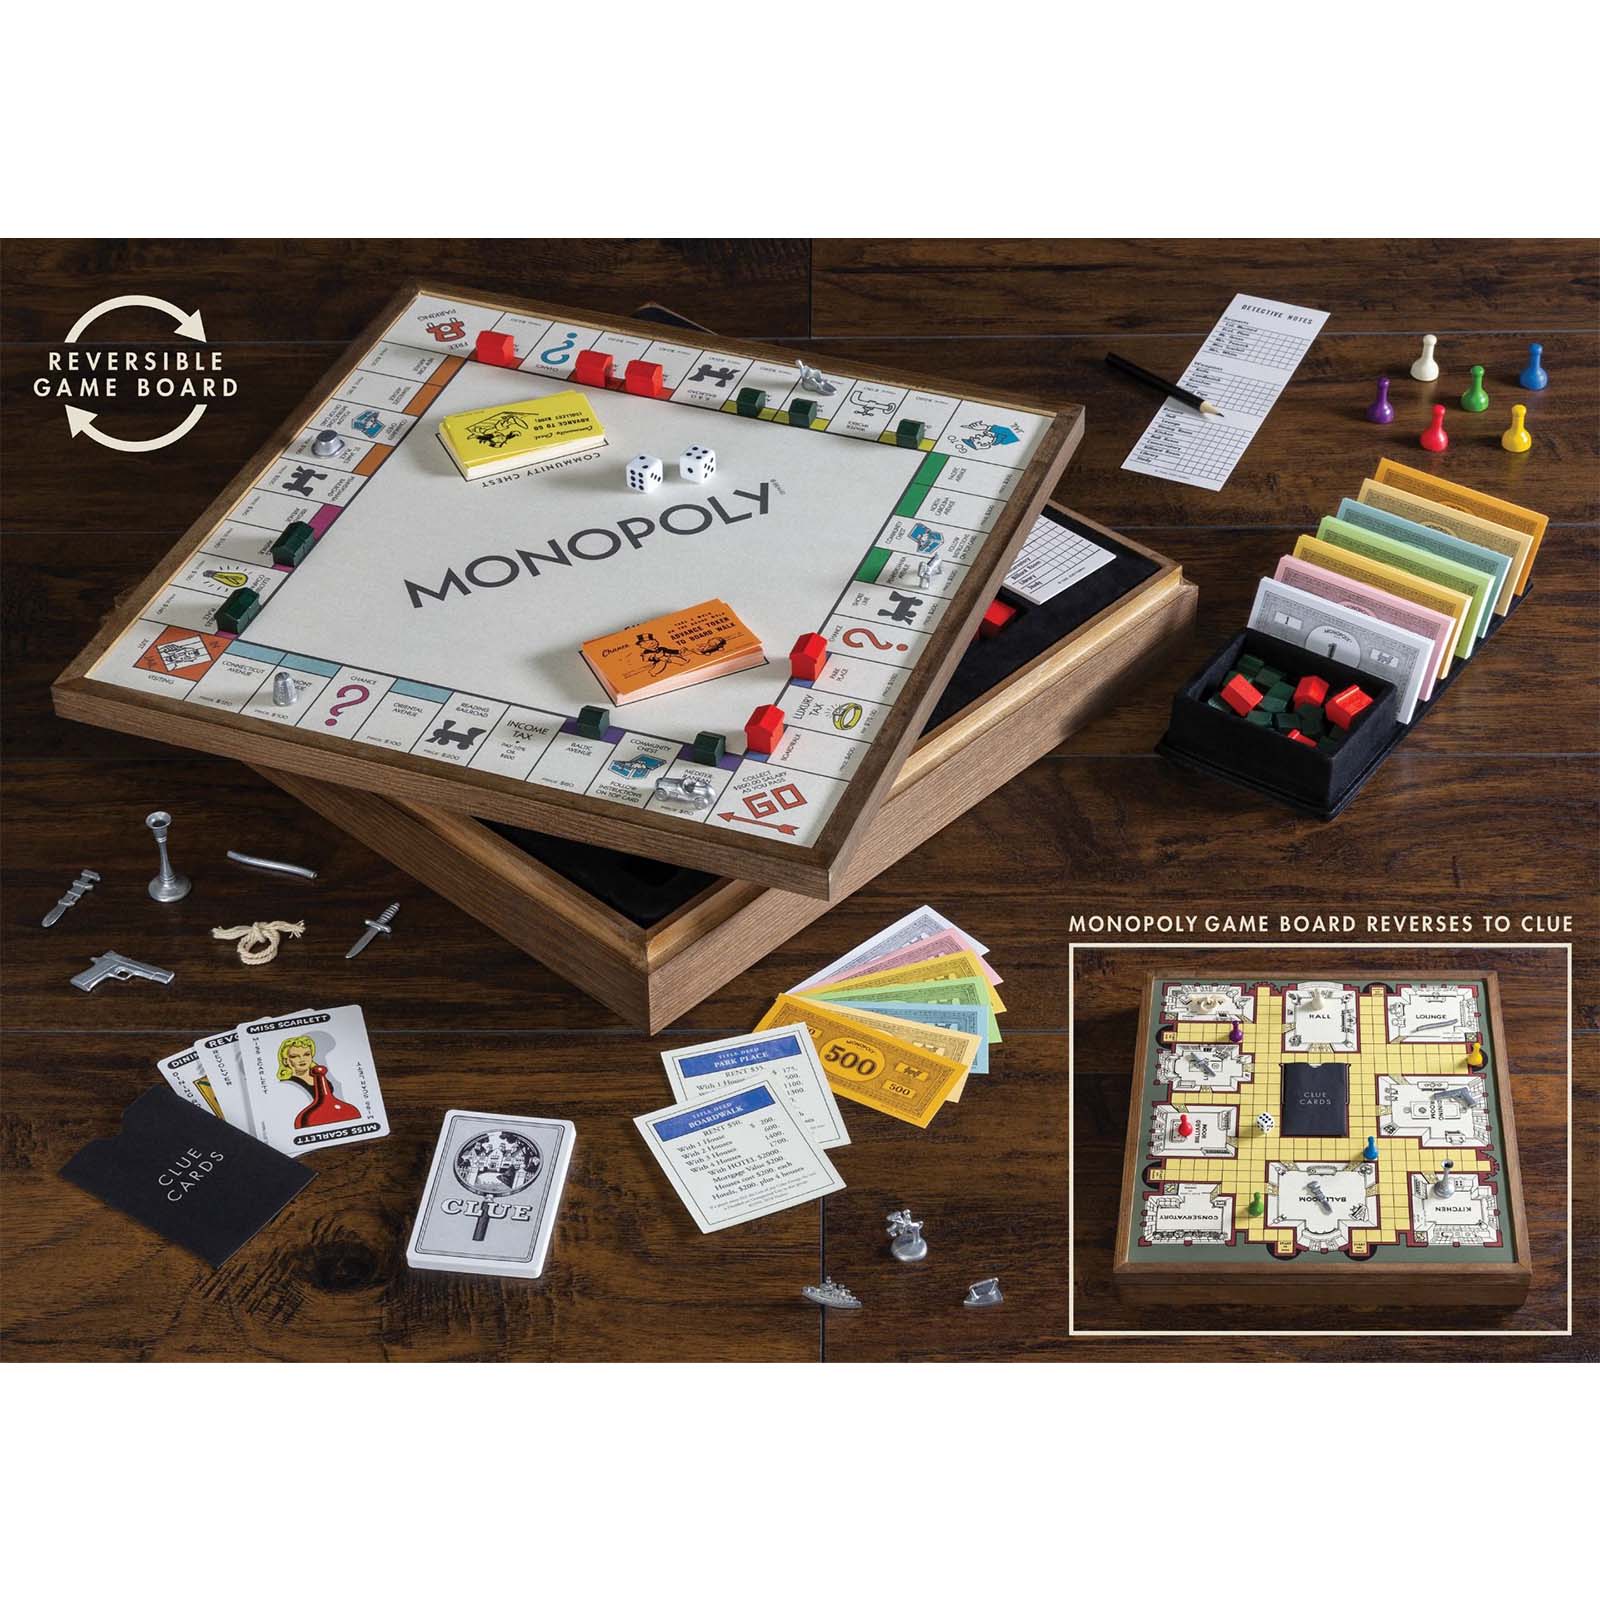 Monopoly And Clue Deluxe